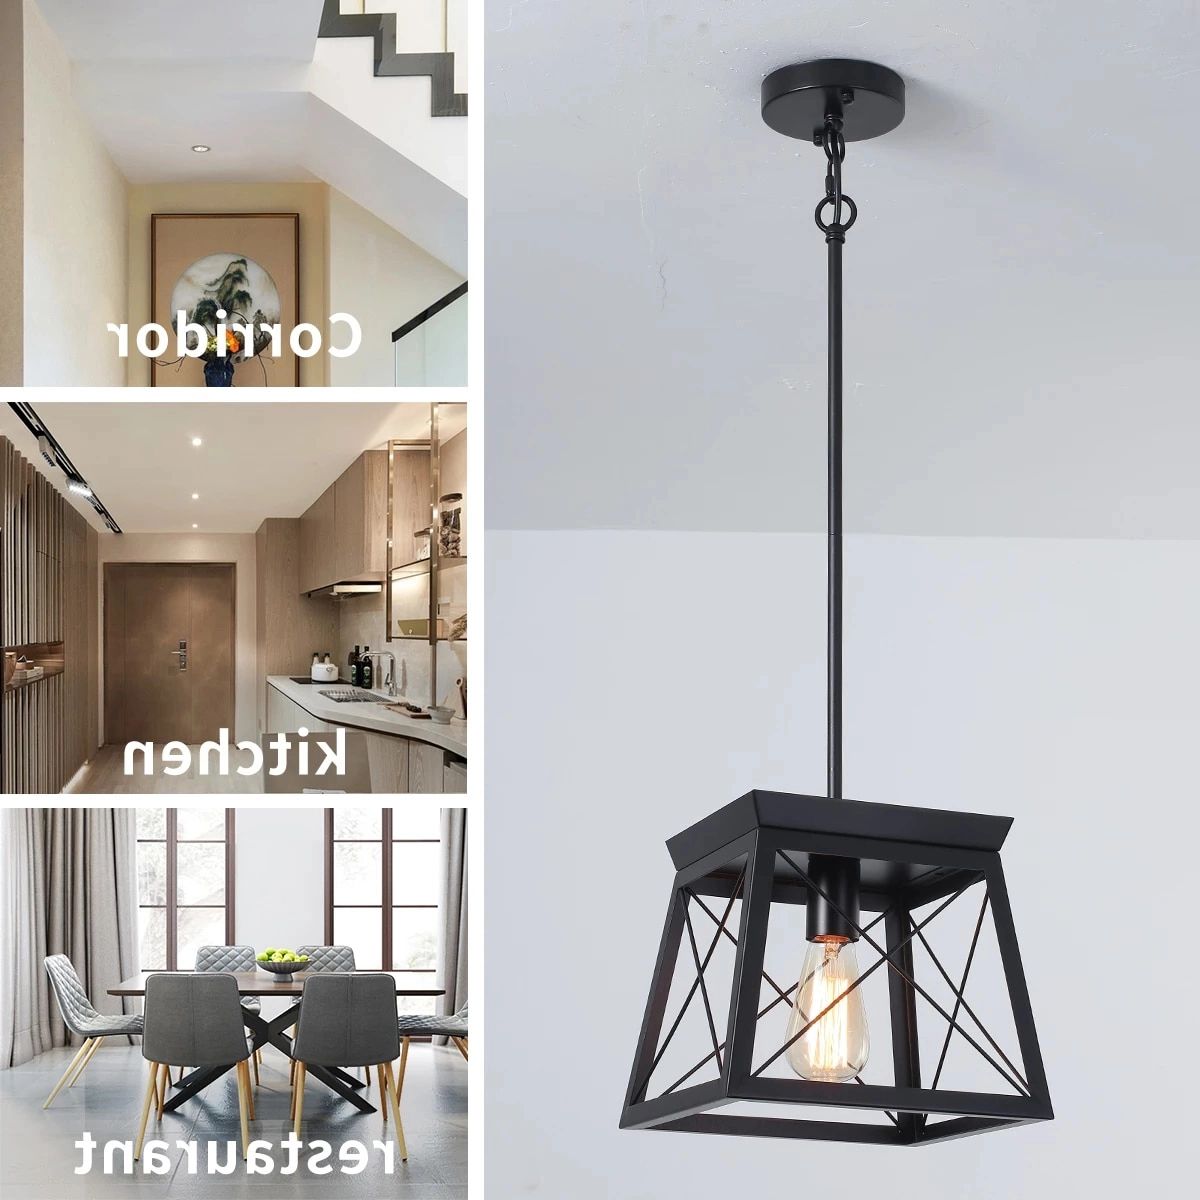 Popular Ganeed Farmhouse Pendant Light Metal Cage With Wooden Finish,1 Light Rustic Lantern  Chandelier,adjustable Height Hanging Light F – Pendant Lights – Aliexpress Intended For Adjustable Lantern Chandeliers (View 15 of 15)